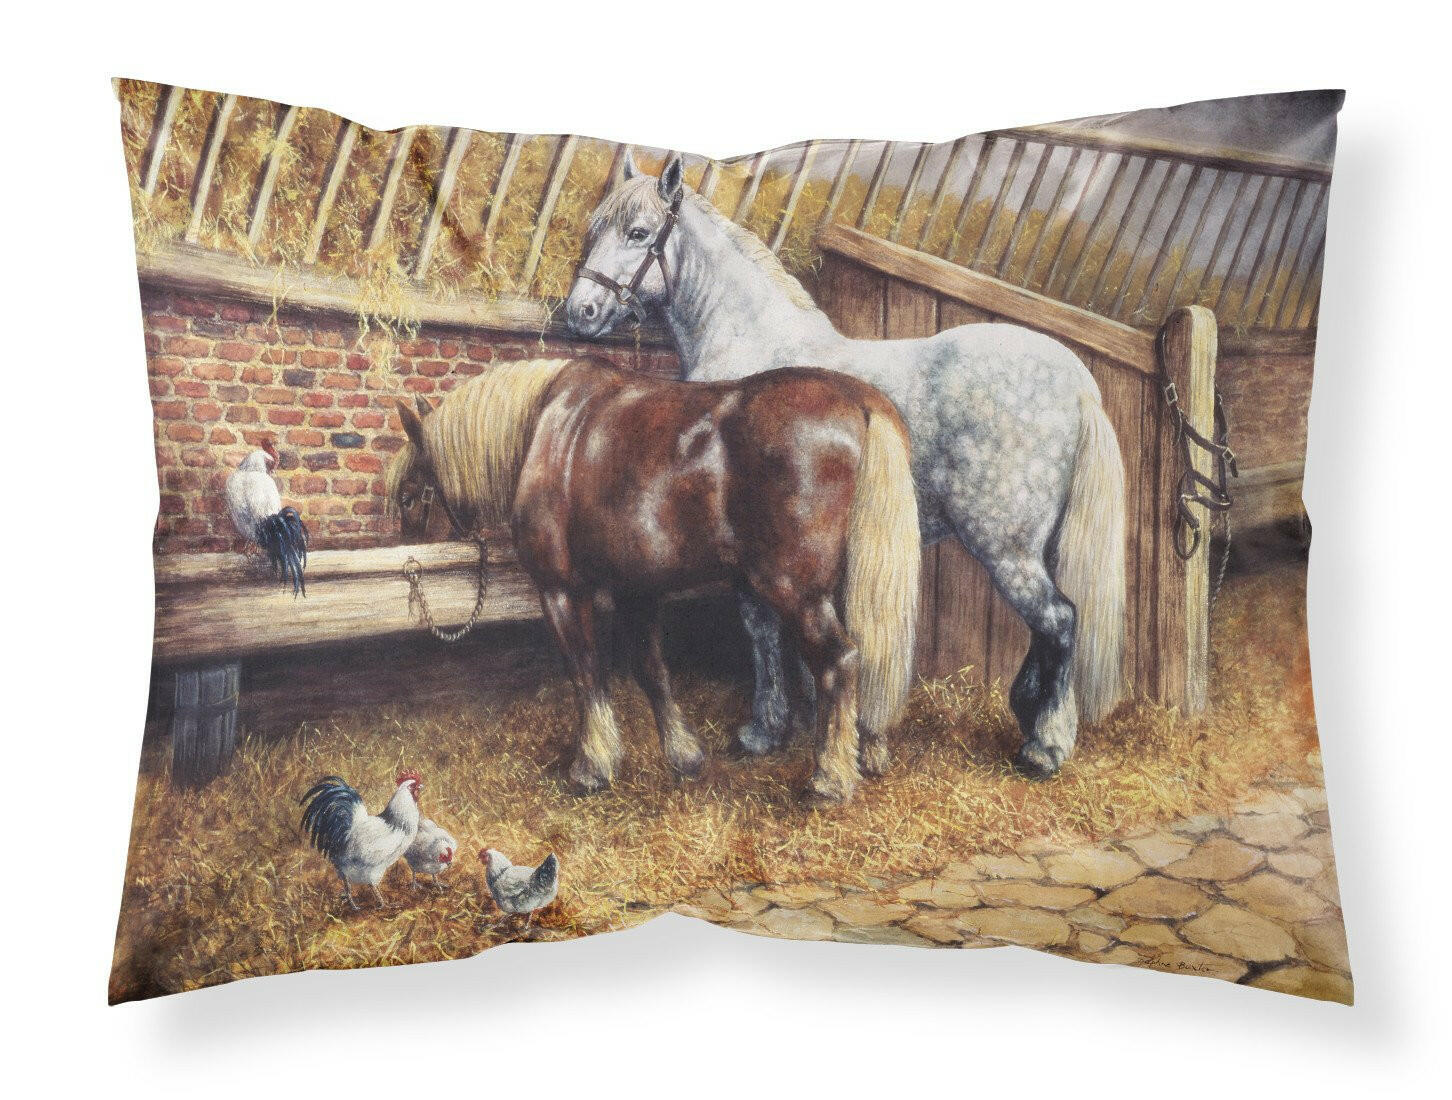 Horses Eating with the Chickens Fabric Standard Pillowcase BDBA0135PILLOWCASE by Caroline's Treasures